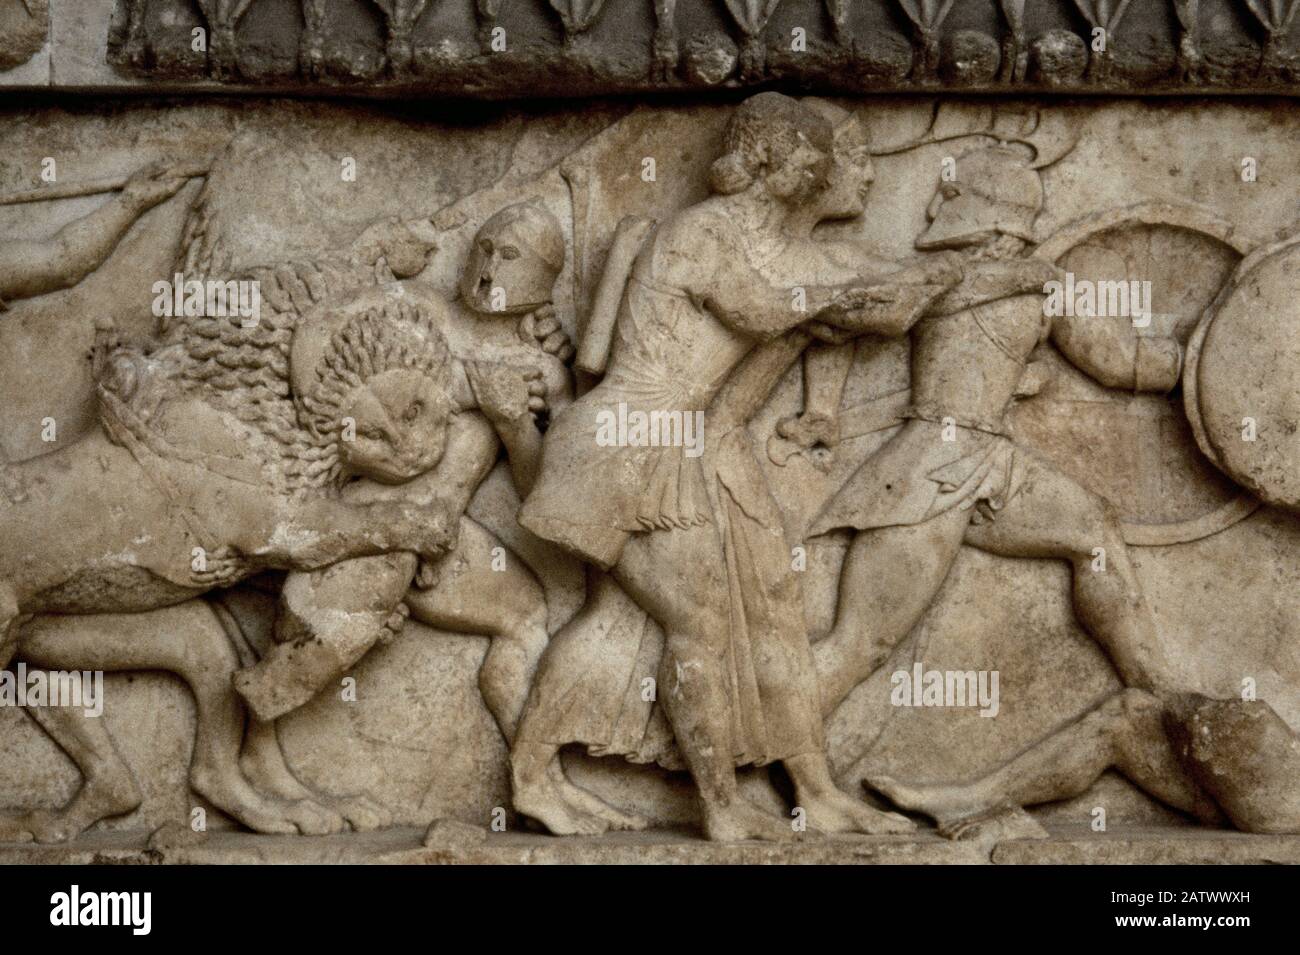 Siphnian Treasury, c. 525 BC. Marble of Paros. North frieze depicting a Gigantomachy. A lion biting a giant. The twins Artemis and Apollo fighting, the Giant Ephialtes lies dead on the ground. Archaeological Museum of Delphi, Greece. Stock Photo